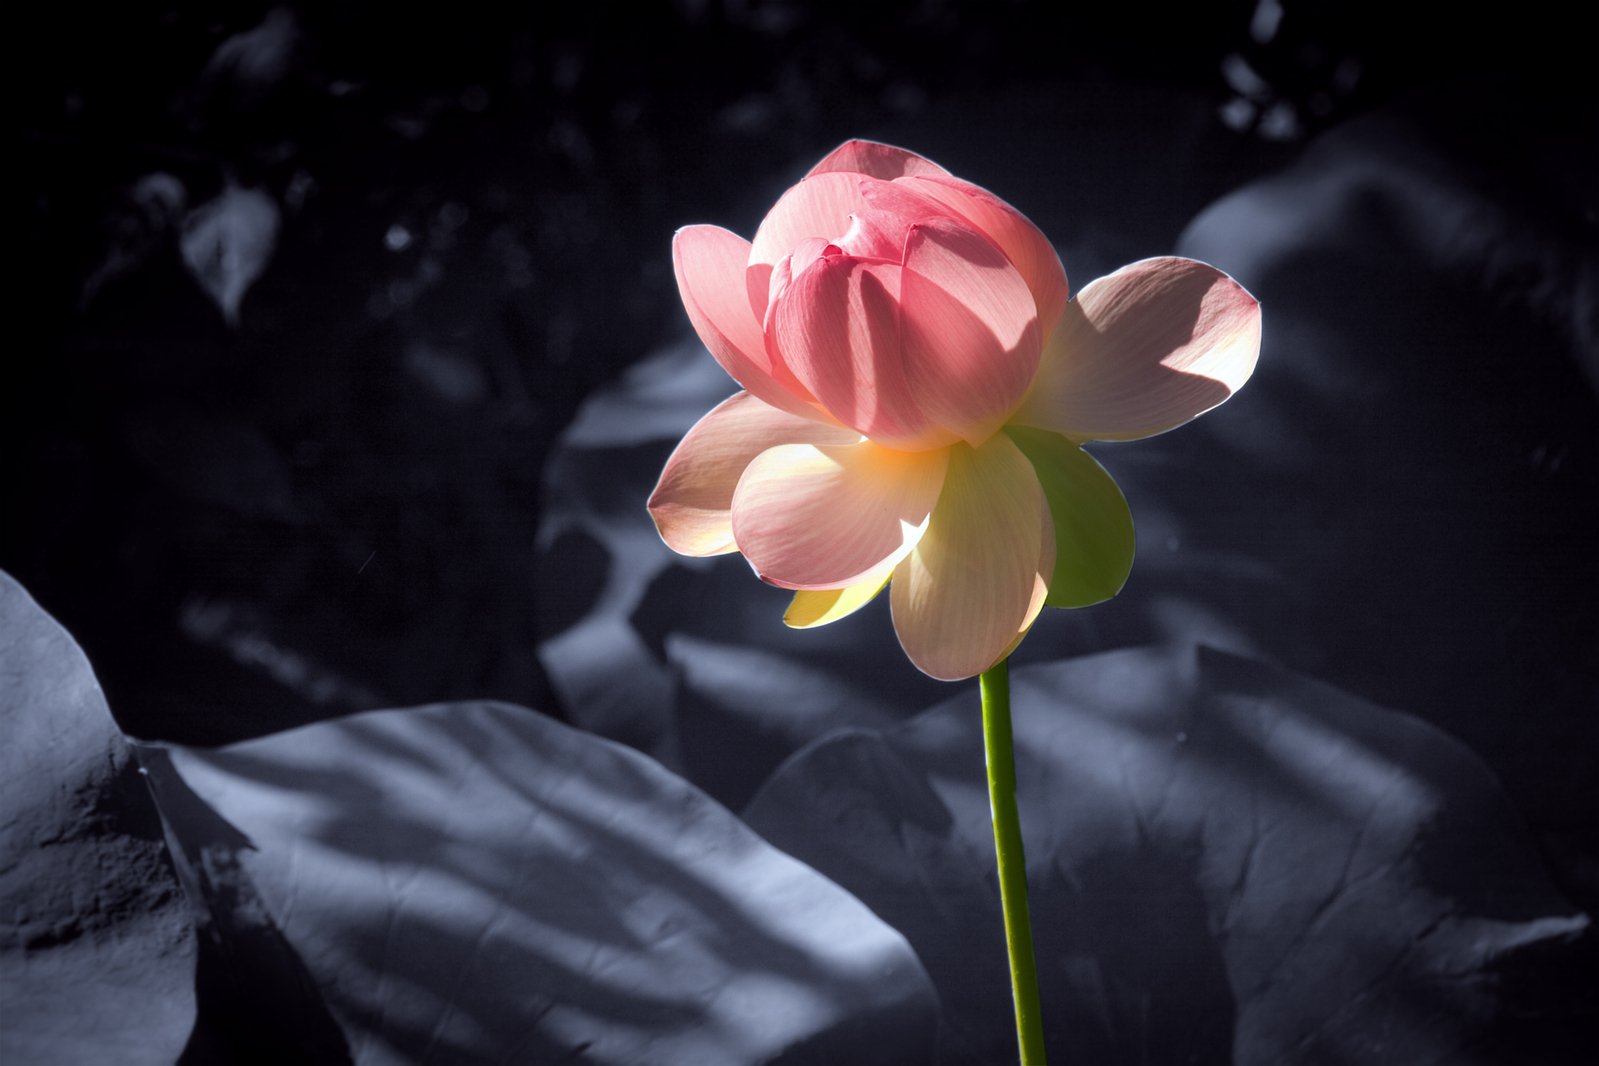 a pink lotus flower is shown on black background